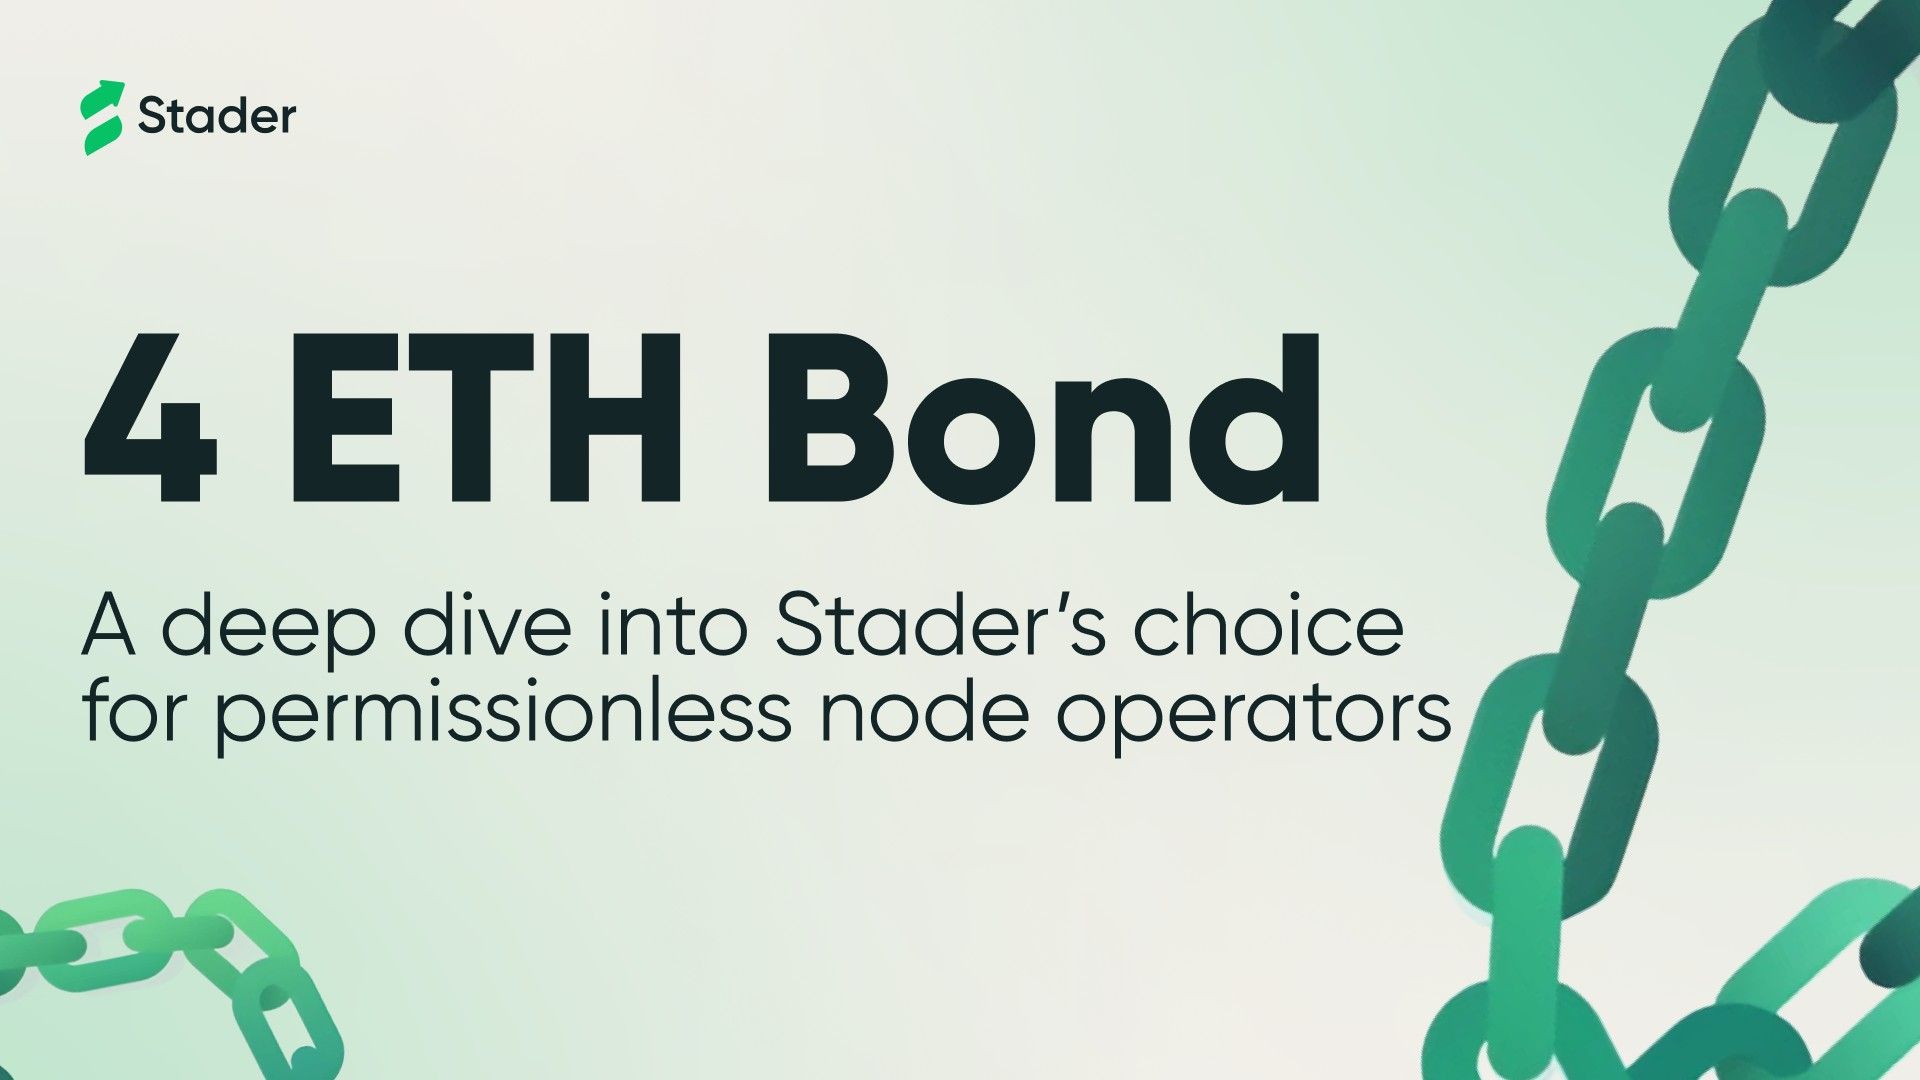 Stader's 4 ETH bond requirement for permissionless node operators: A comprehensive analysis